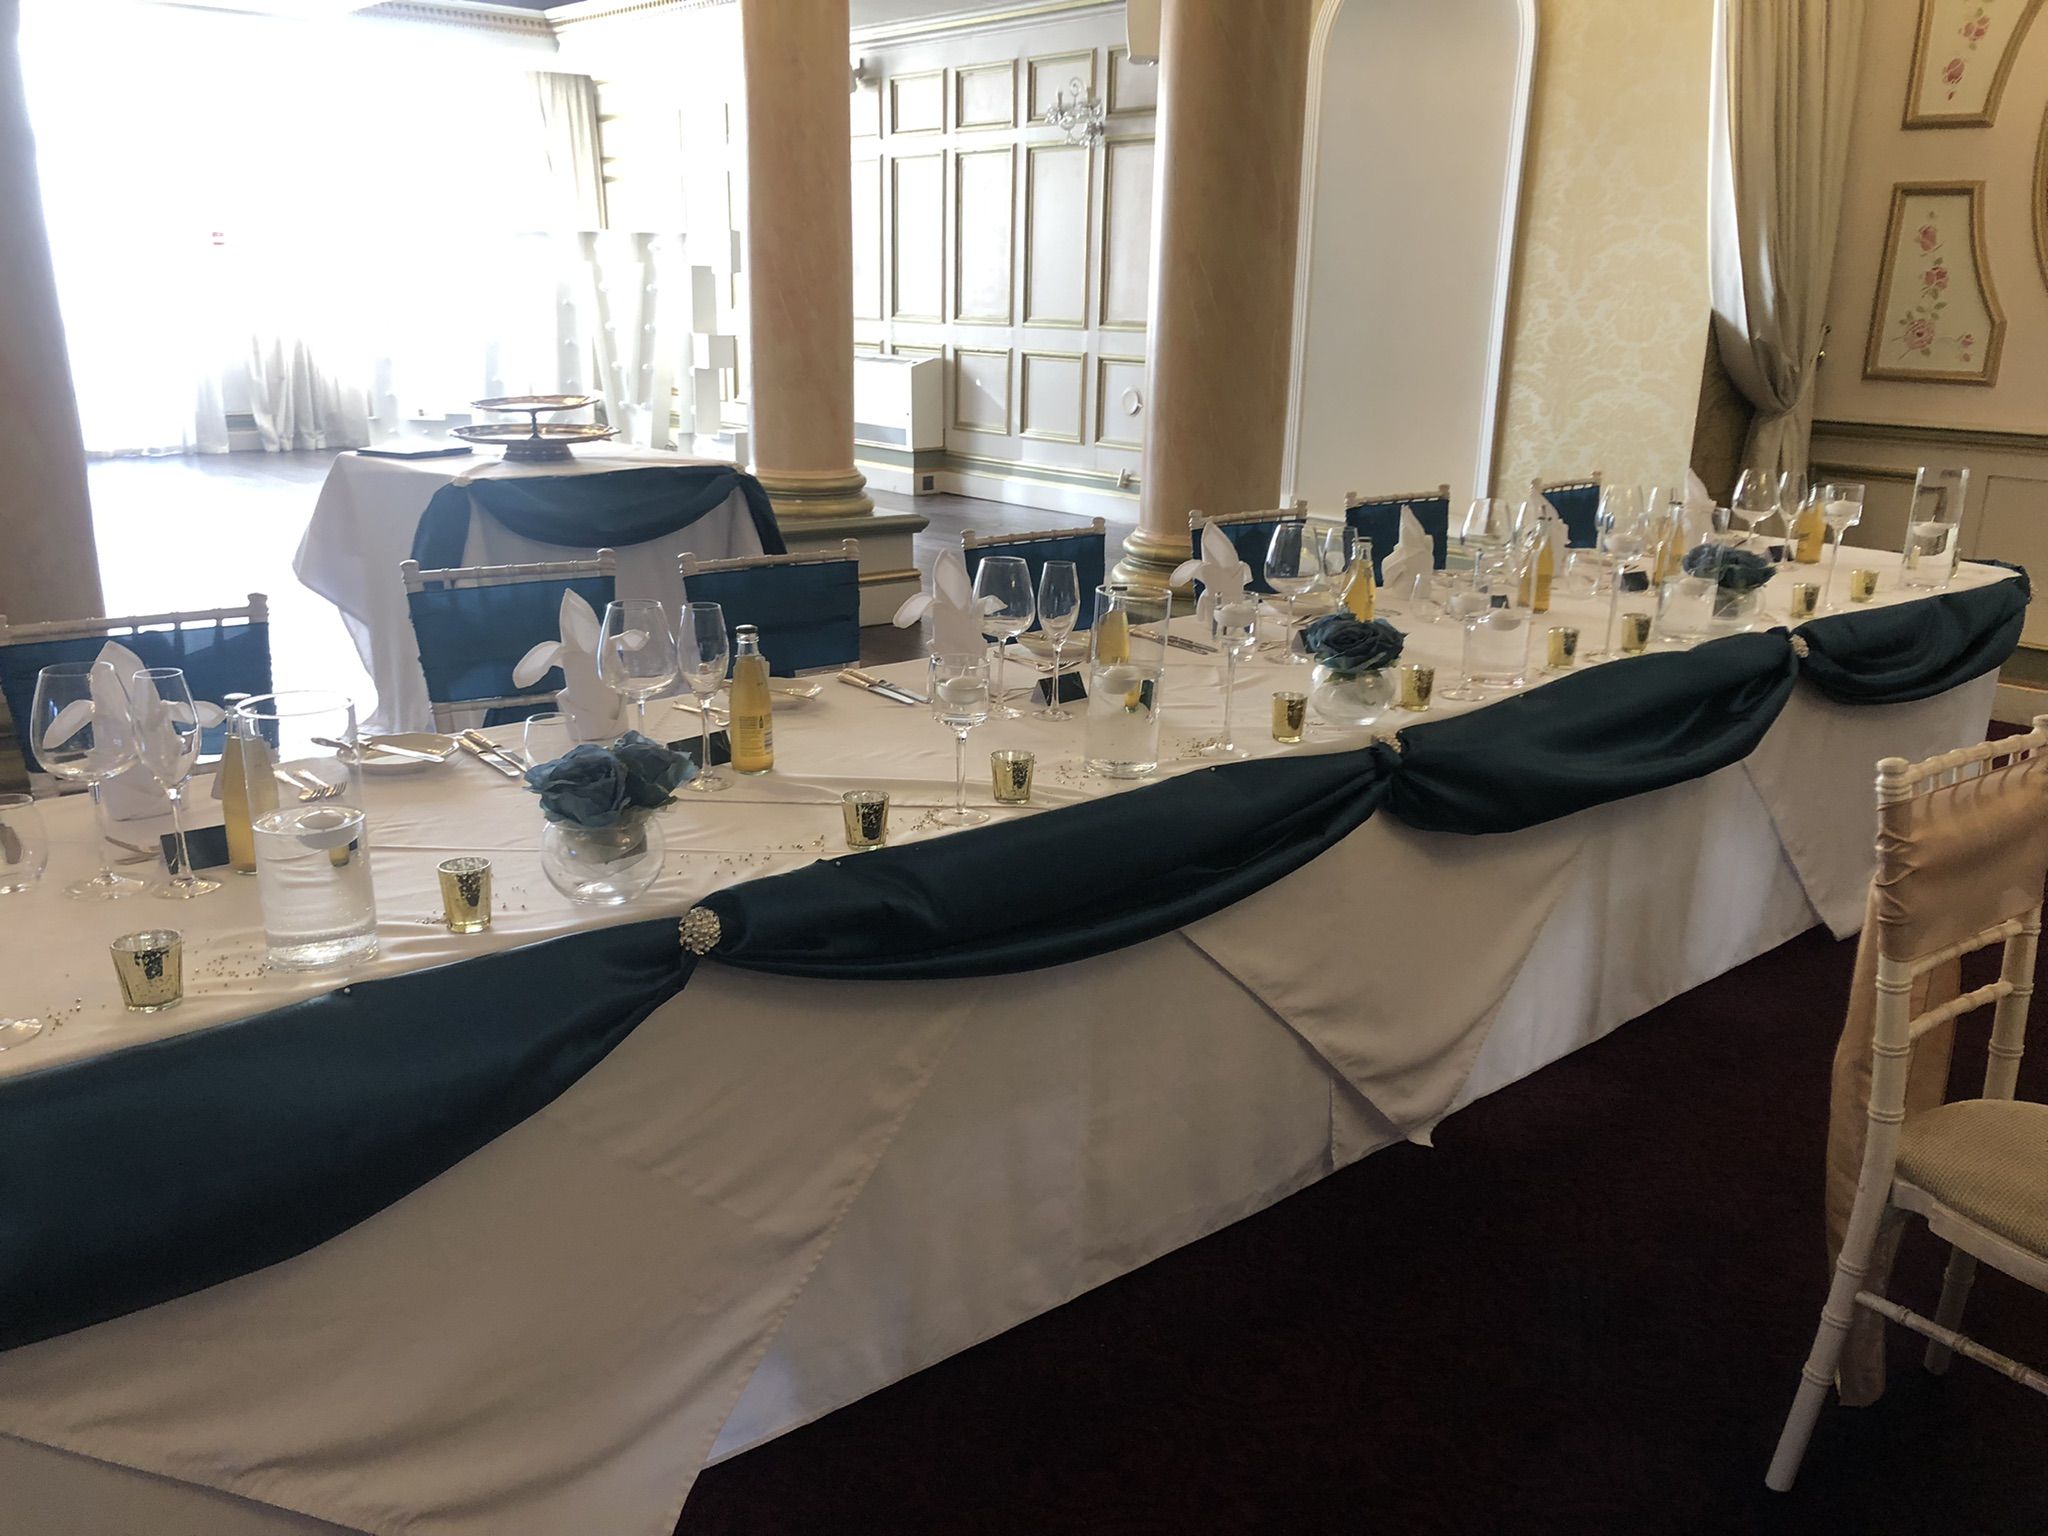 a long table is set up for a formal function.